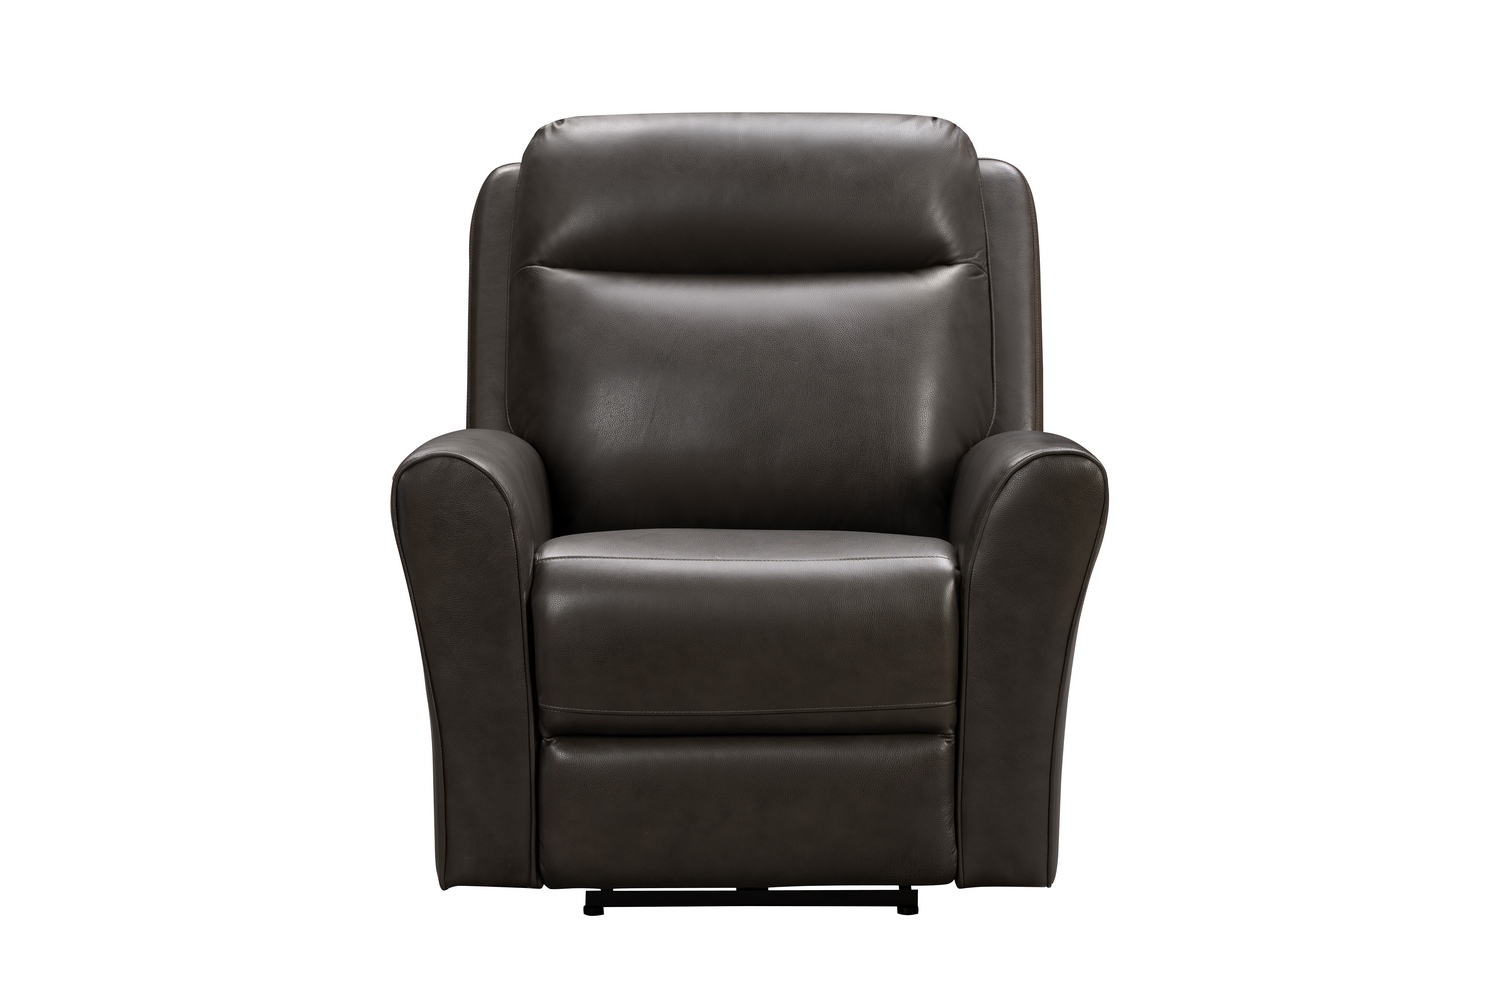 Barcalounger Kelsey Big and Tall Power Recliner Chair with Power Head Rest and Lumbar - Matteo Smokey Gray/Leather Match